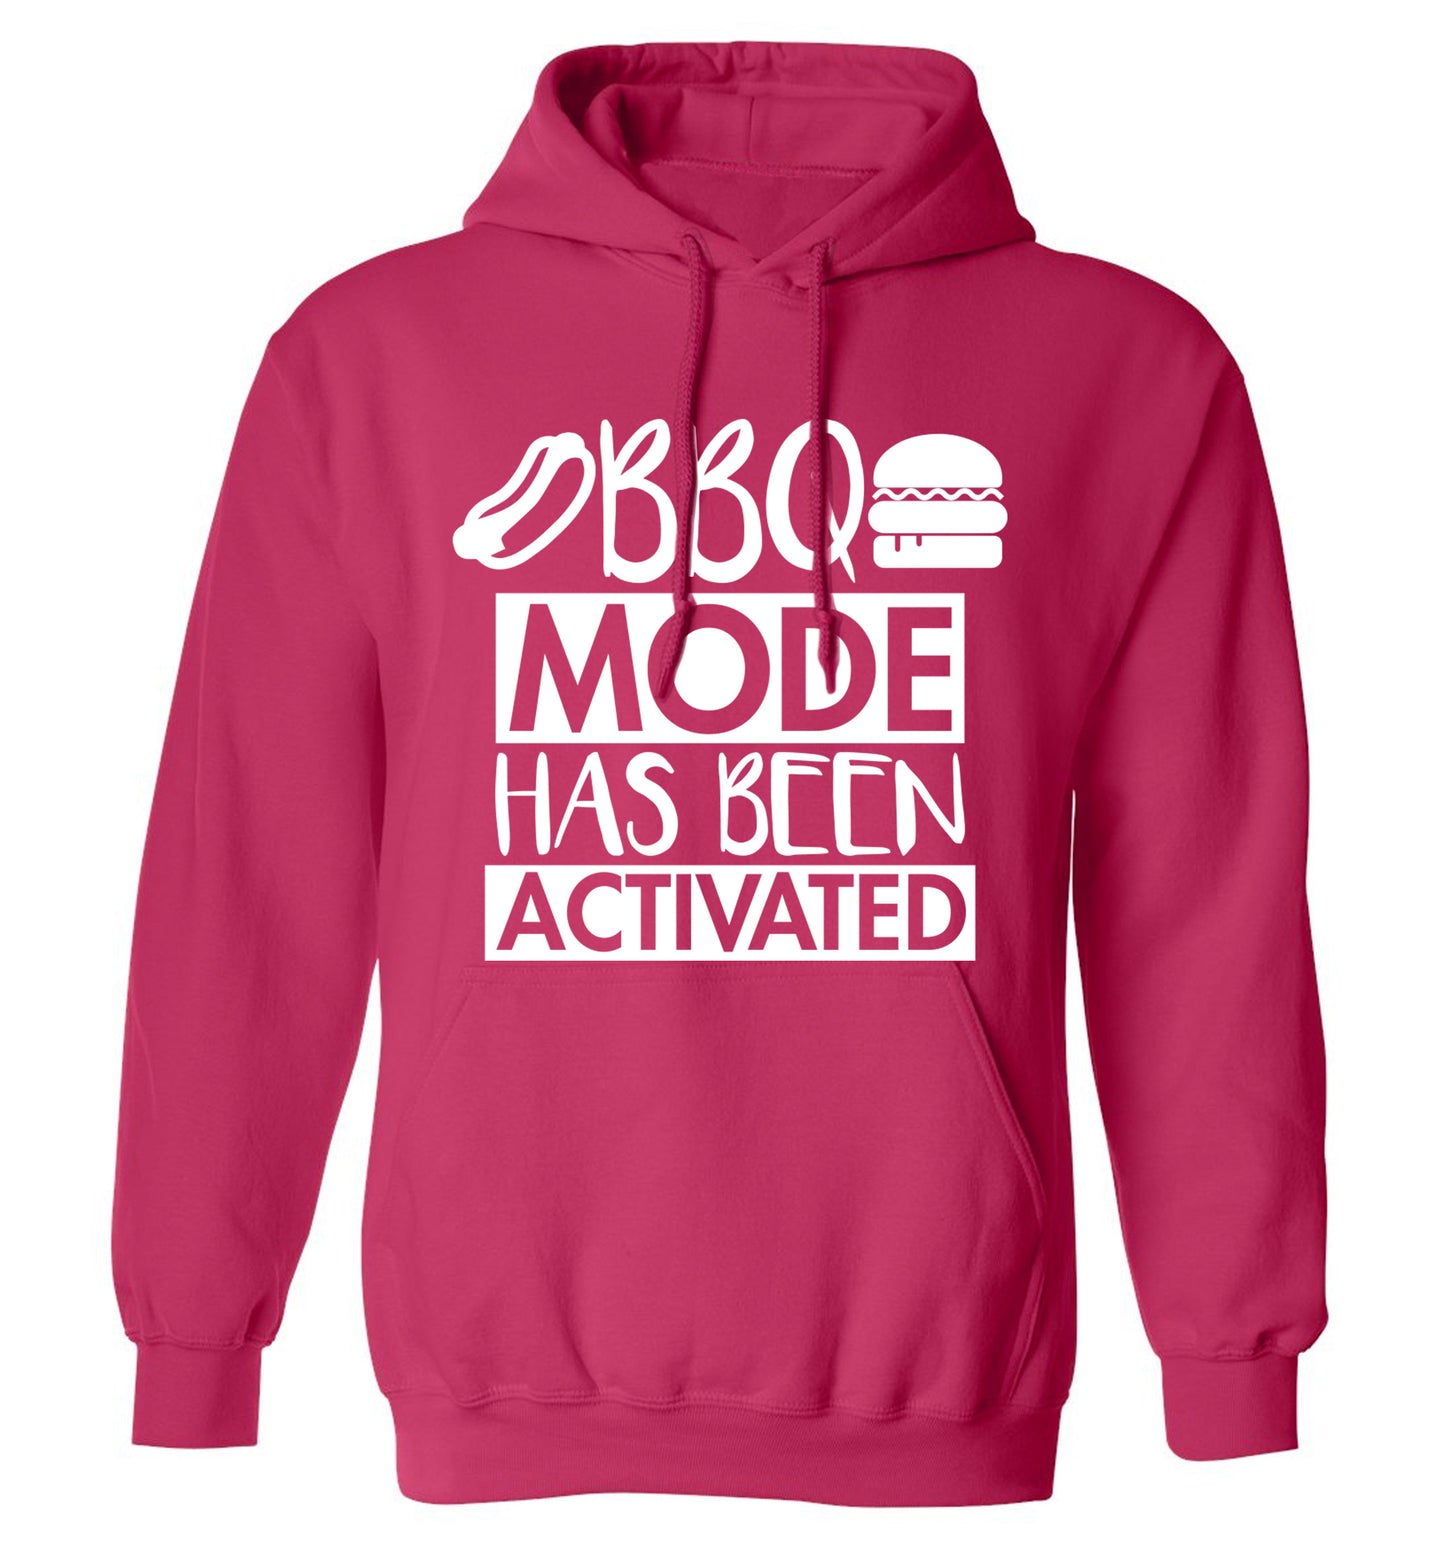 Bbq mode has been activated adults unisex pink hoodie 2XL